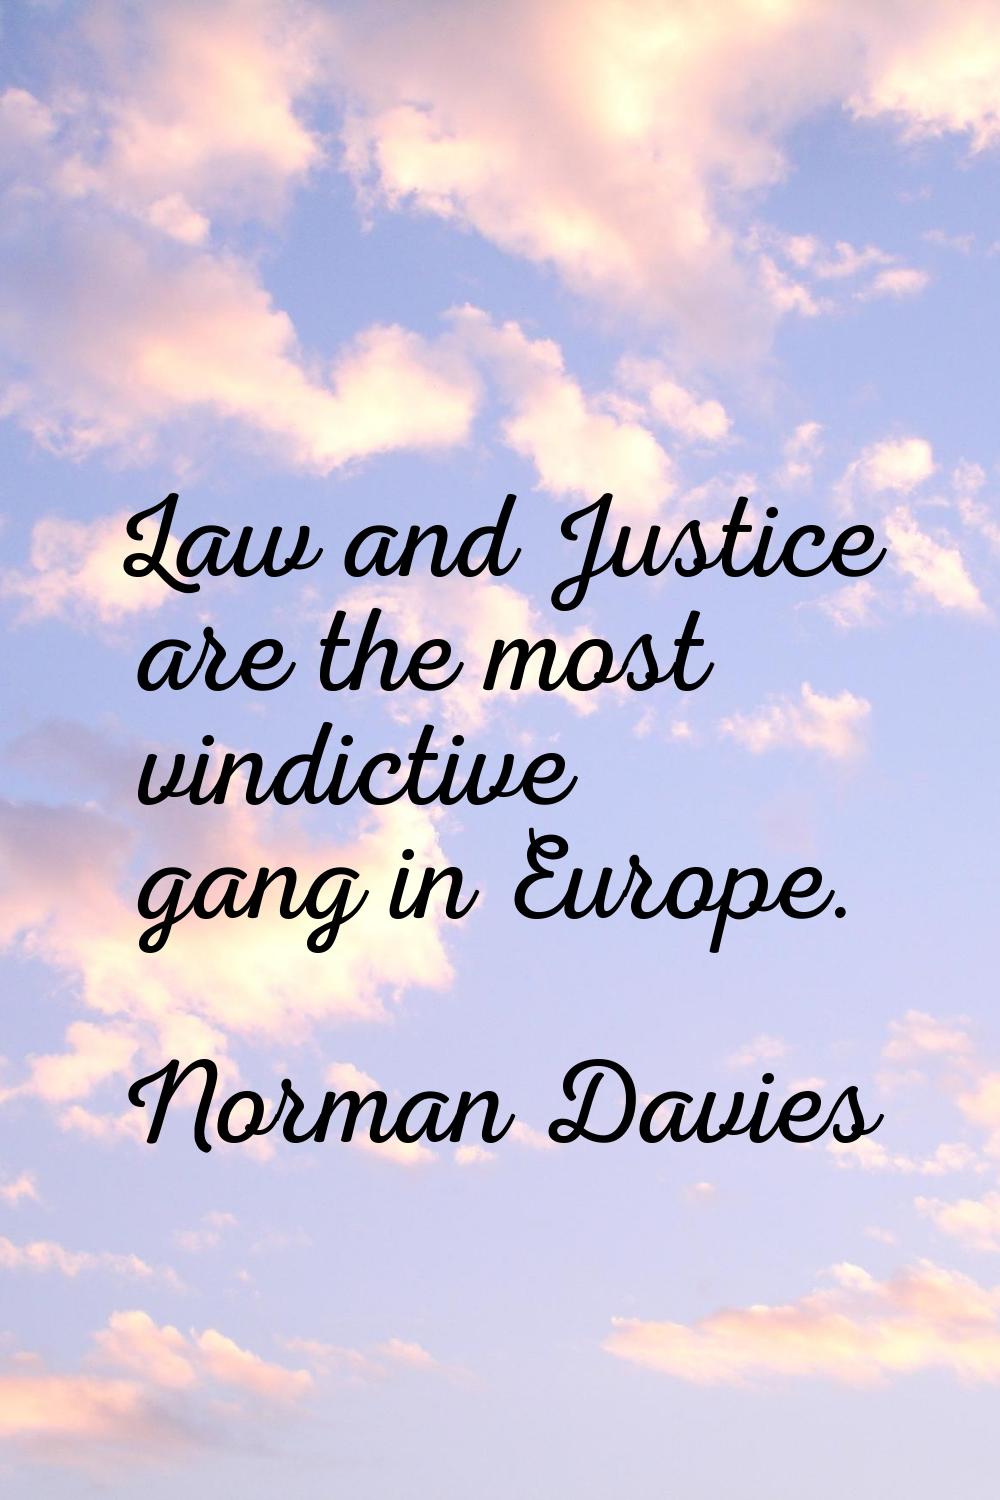 Law and Justice are the most vindictive gang in Europe.